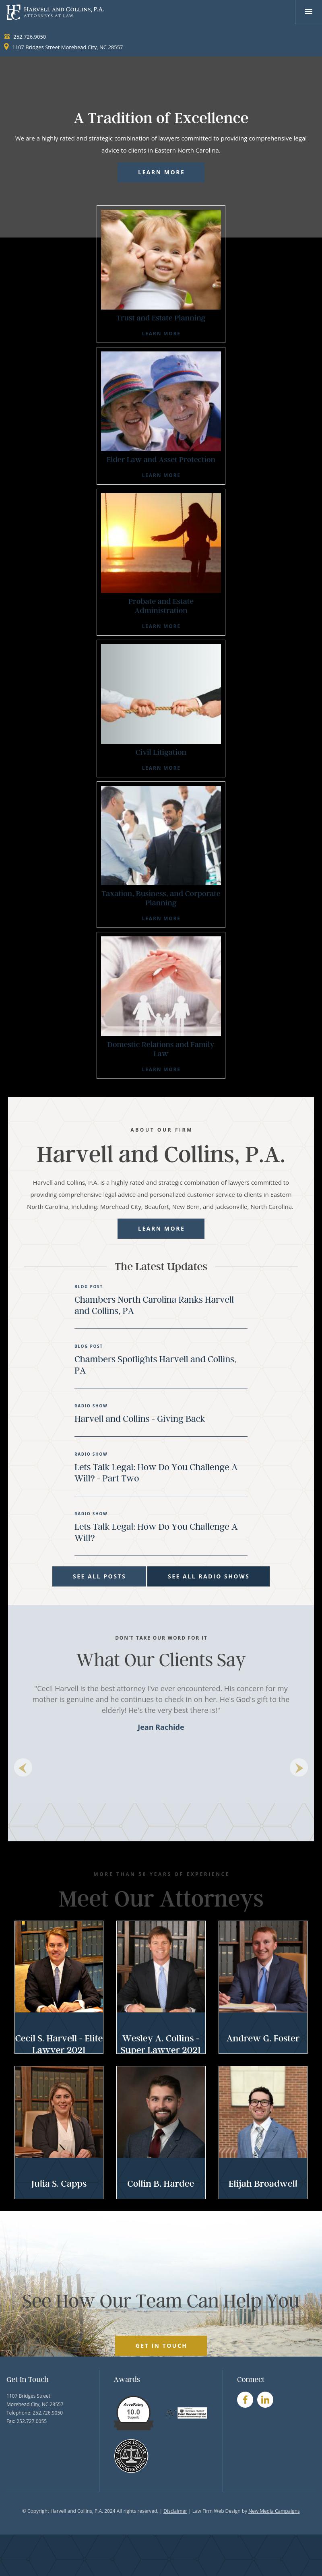 Harvell & Collins, P.A. - Morehead City NC Lawyers